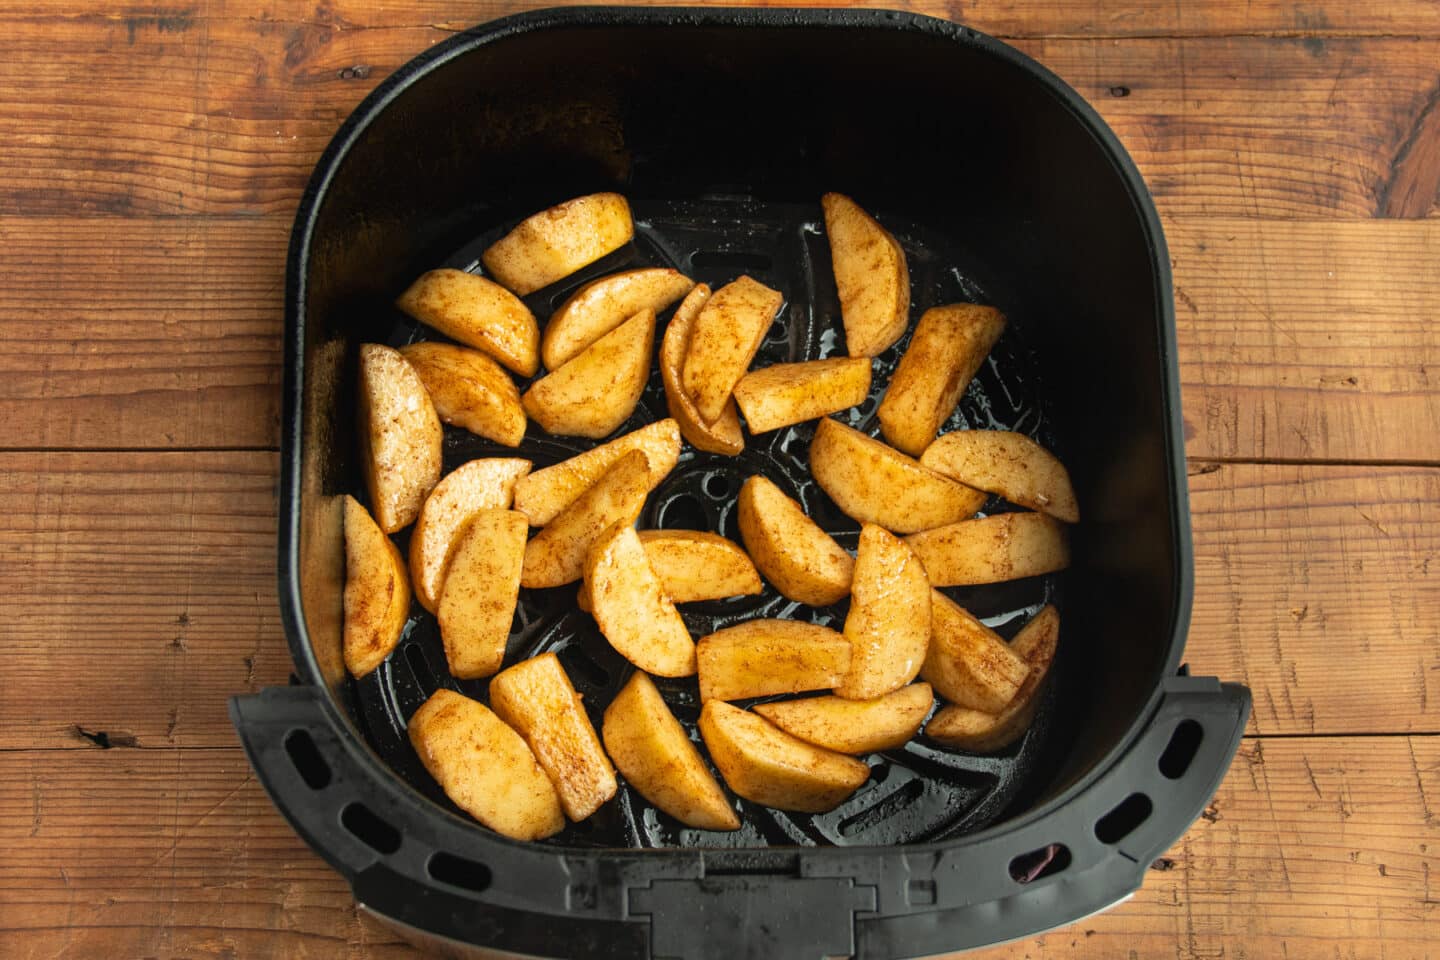 This is a picture of the air fryer basket with the raw apples.